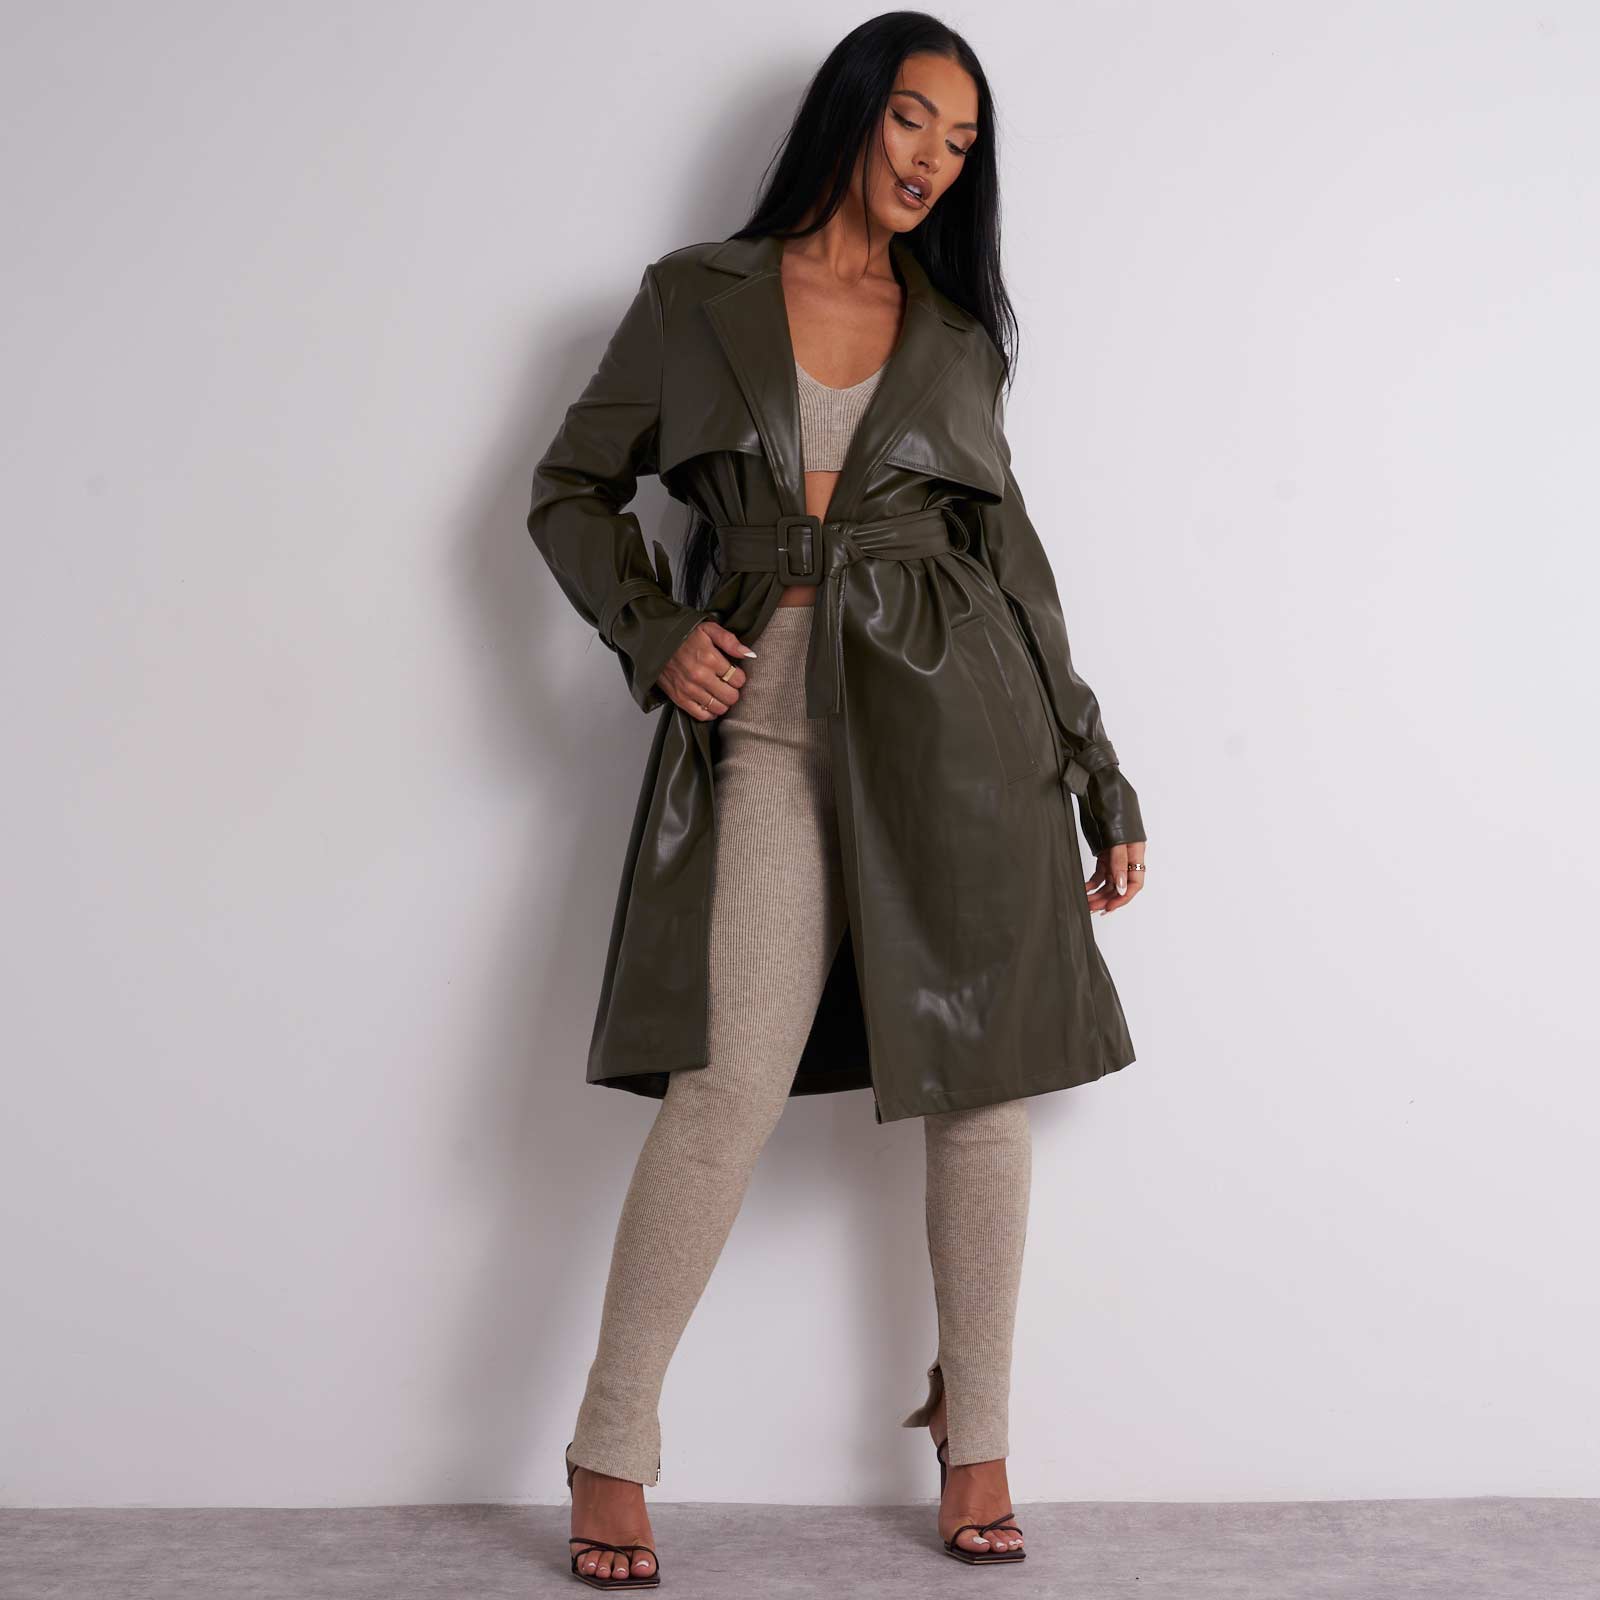 Belted Trench Coat In Khaki Green Faux Leather UK Medium/Large M/L, Green